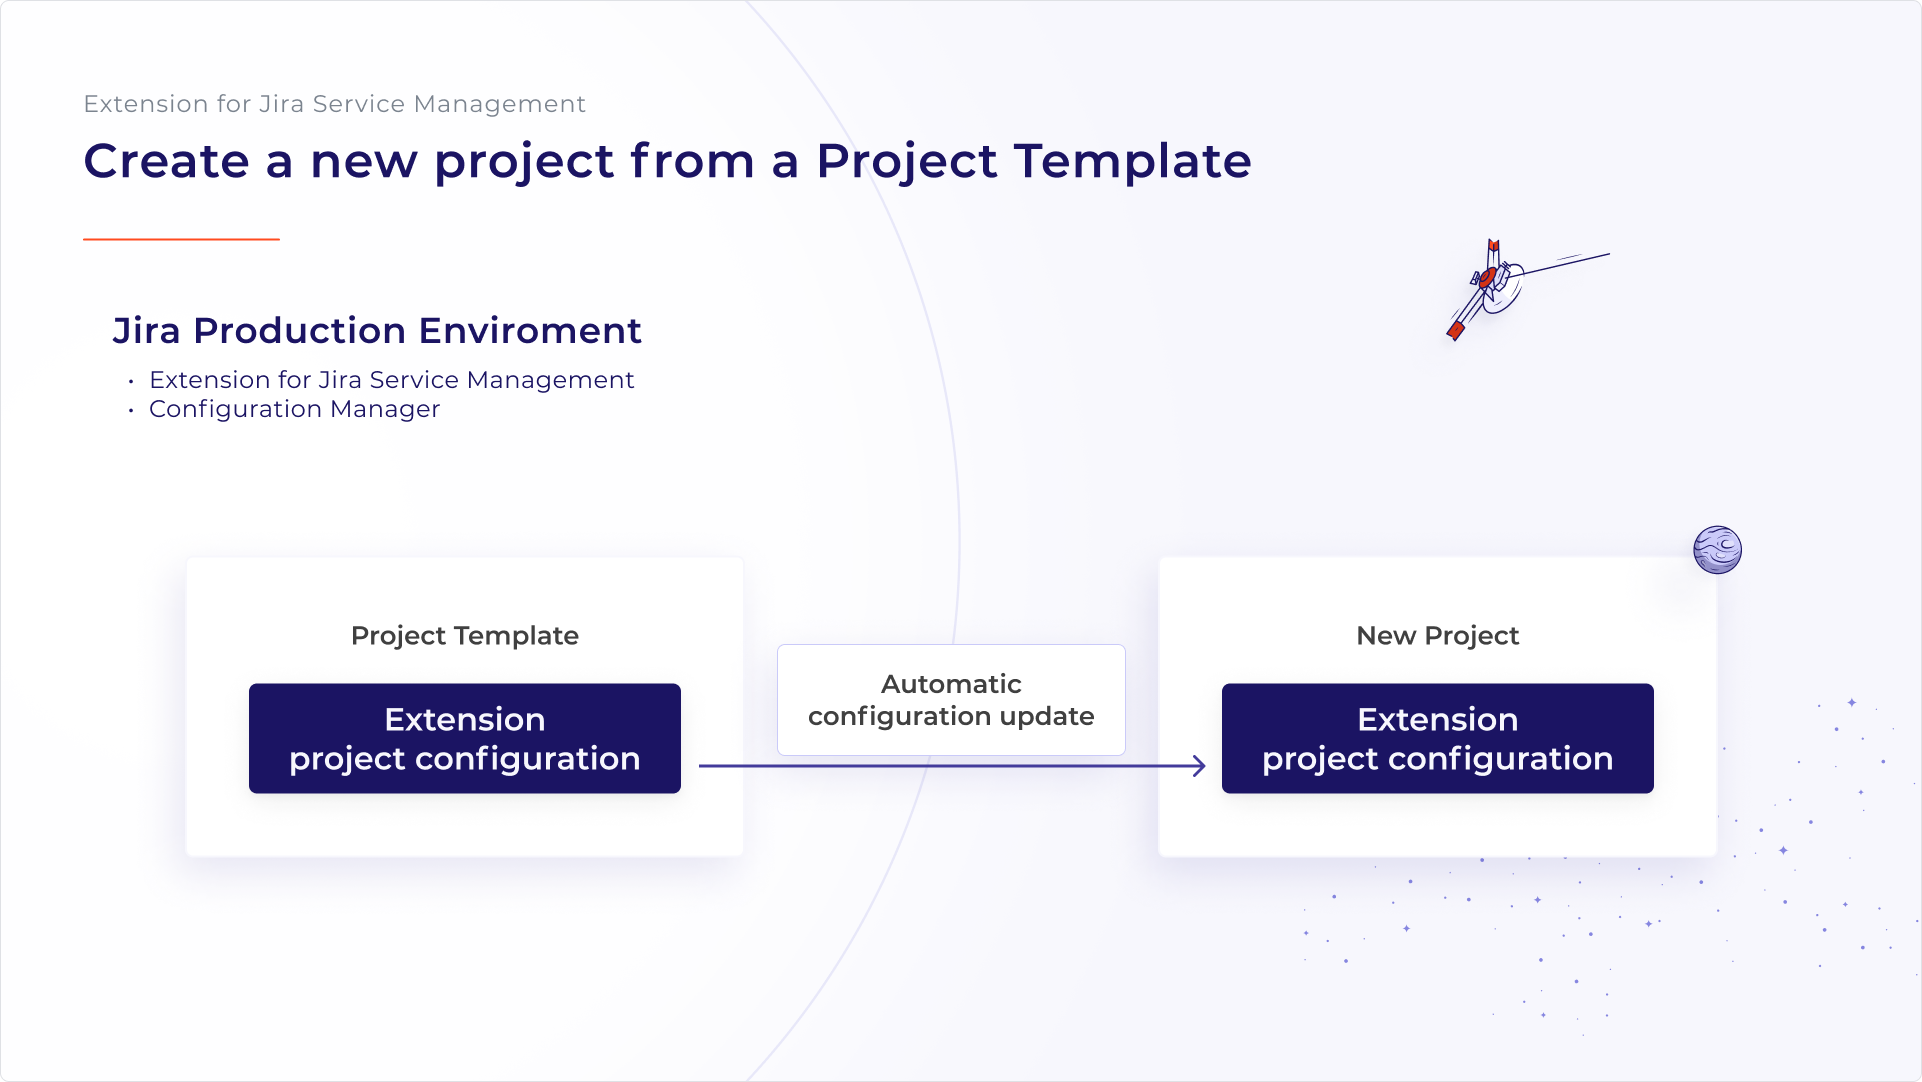 Migration between existing project and a new service project